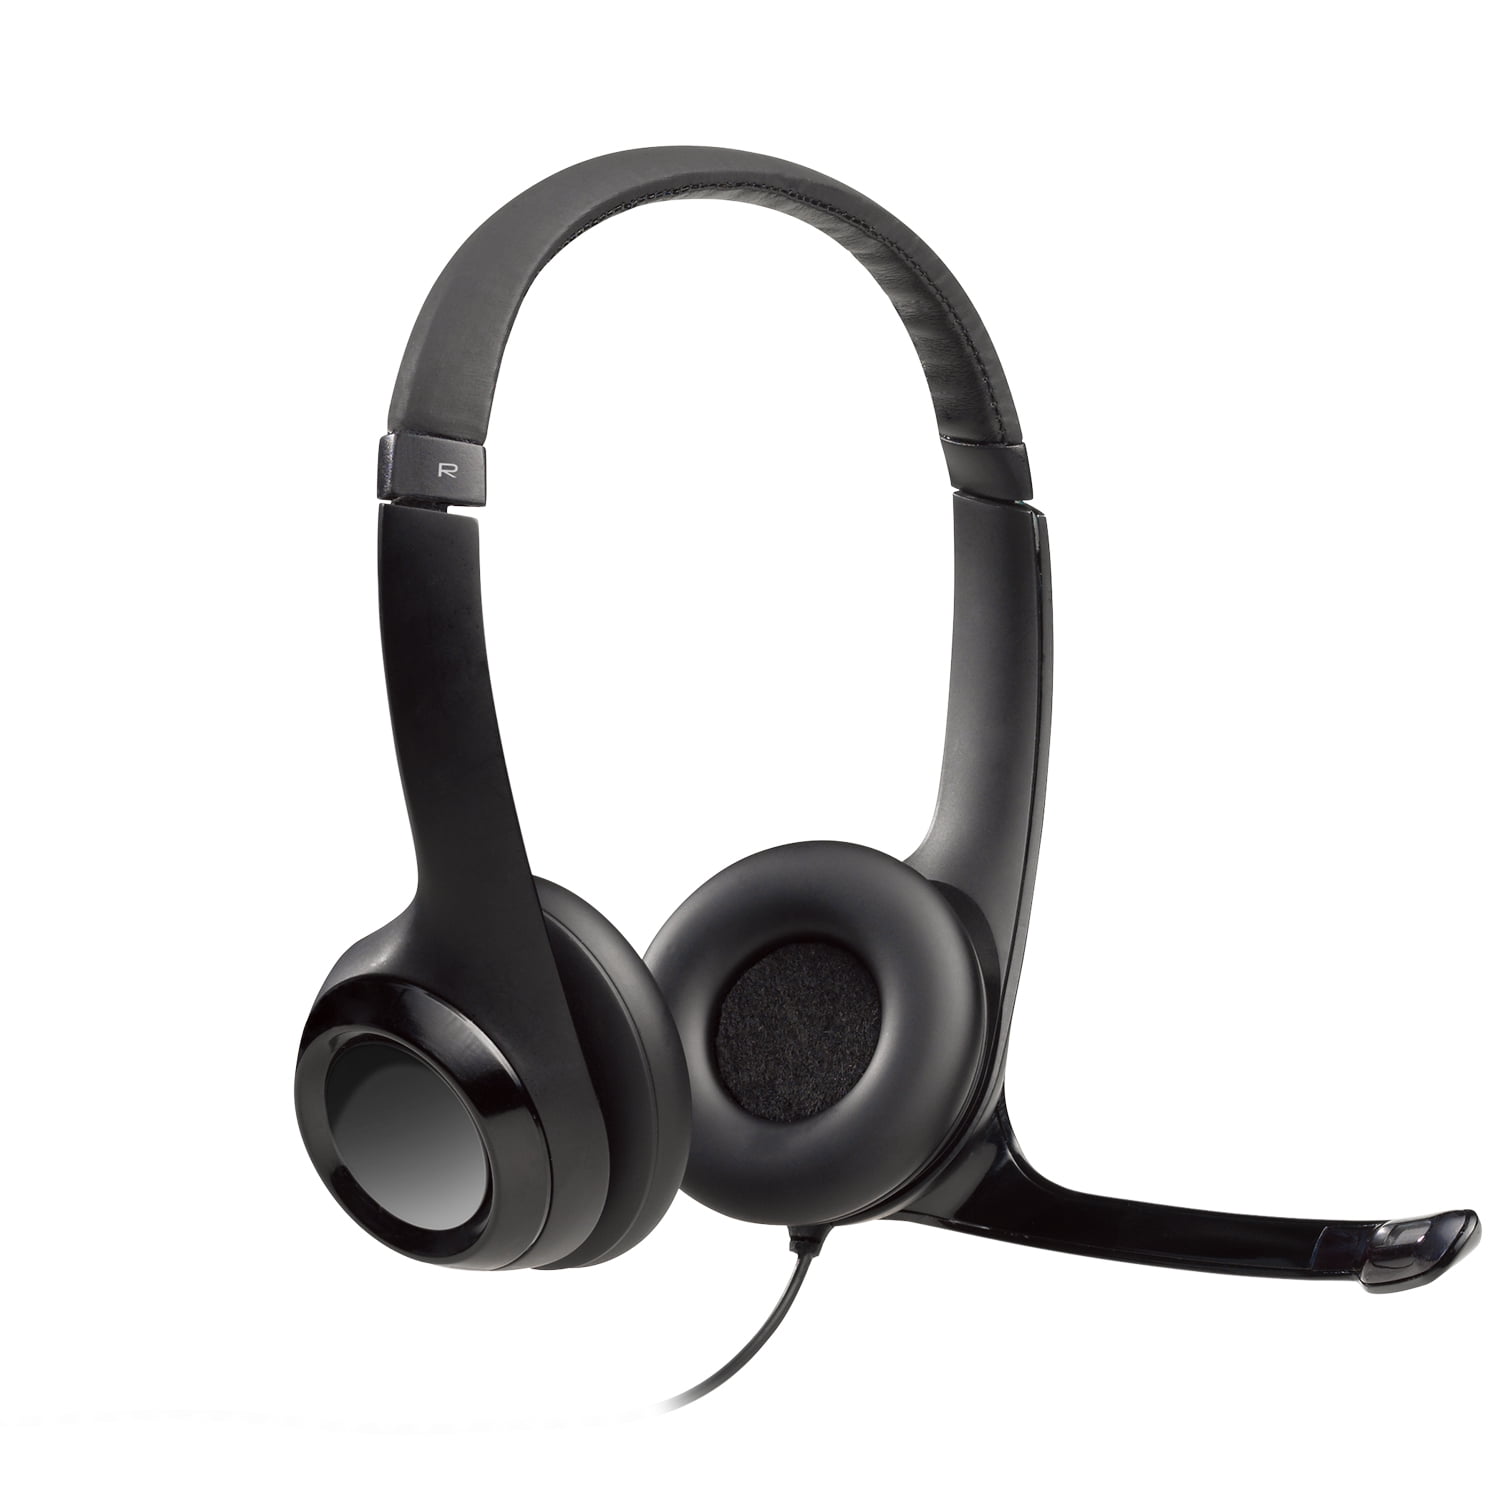 Visser Nieuwsgierigheid Beugel Logitech Wired USB Headset, Stereo Headphones with Noise-Cancelling  Microphone, USB, In-Line Controls, PC/Mac/Laptop, Black - Walmart.com